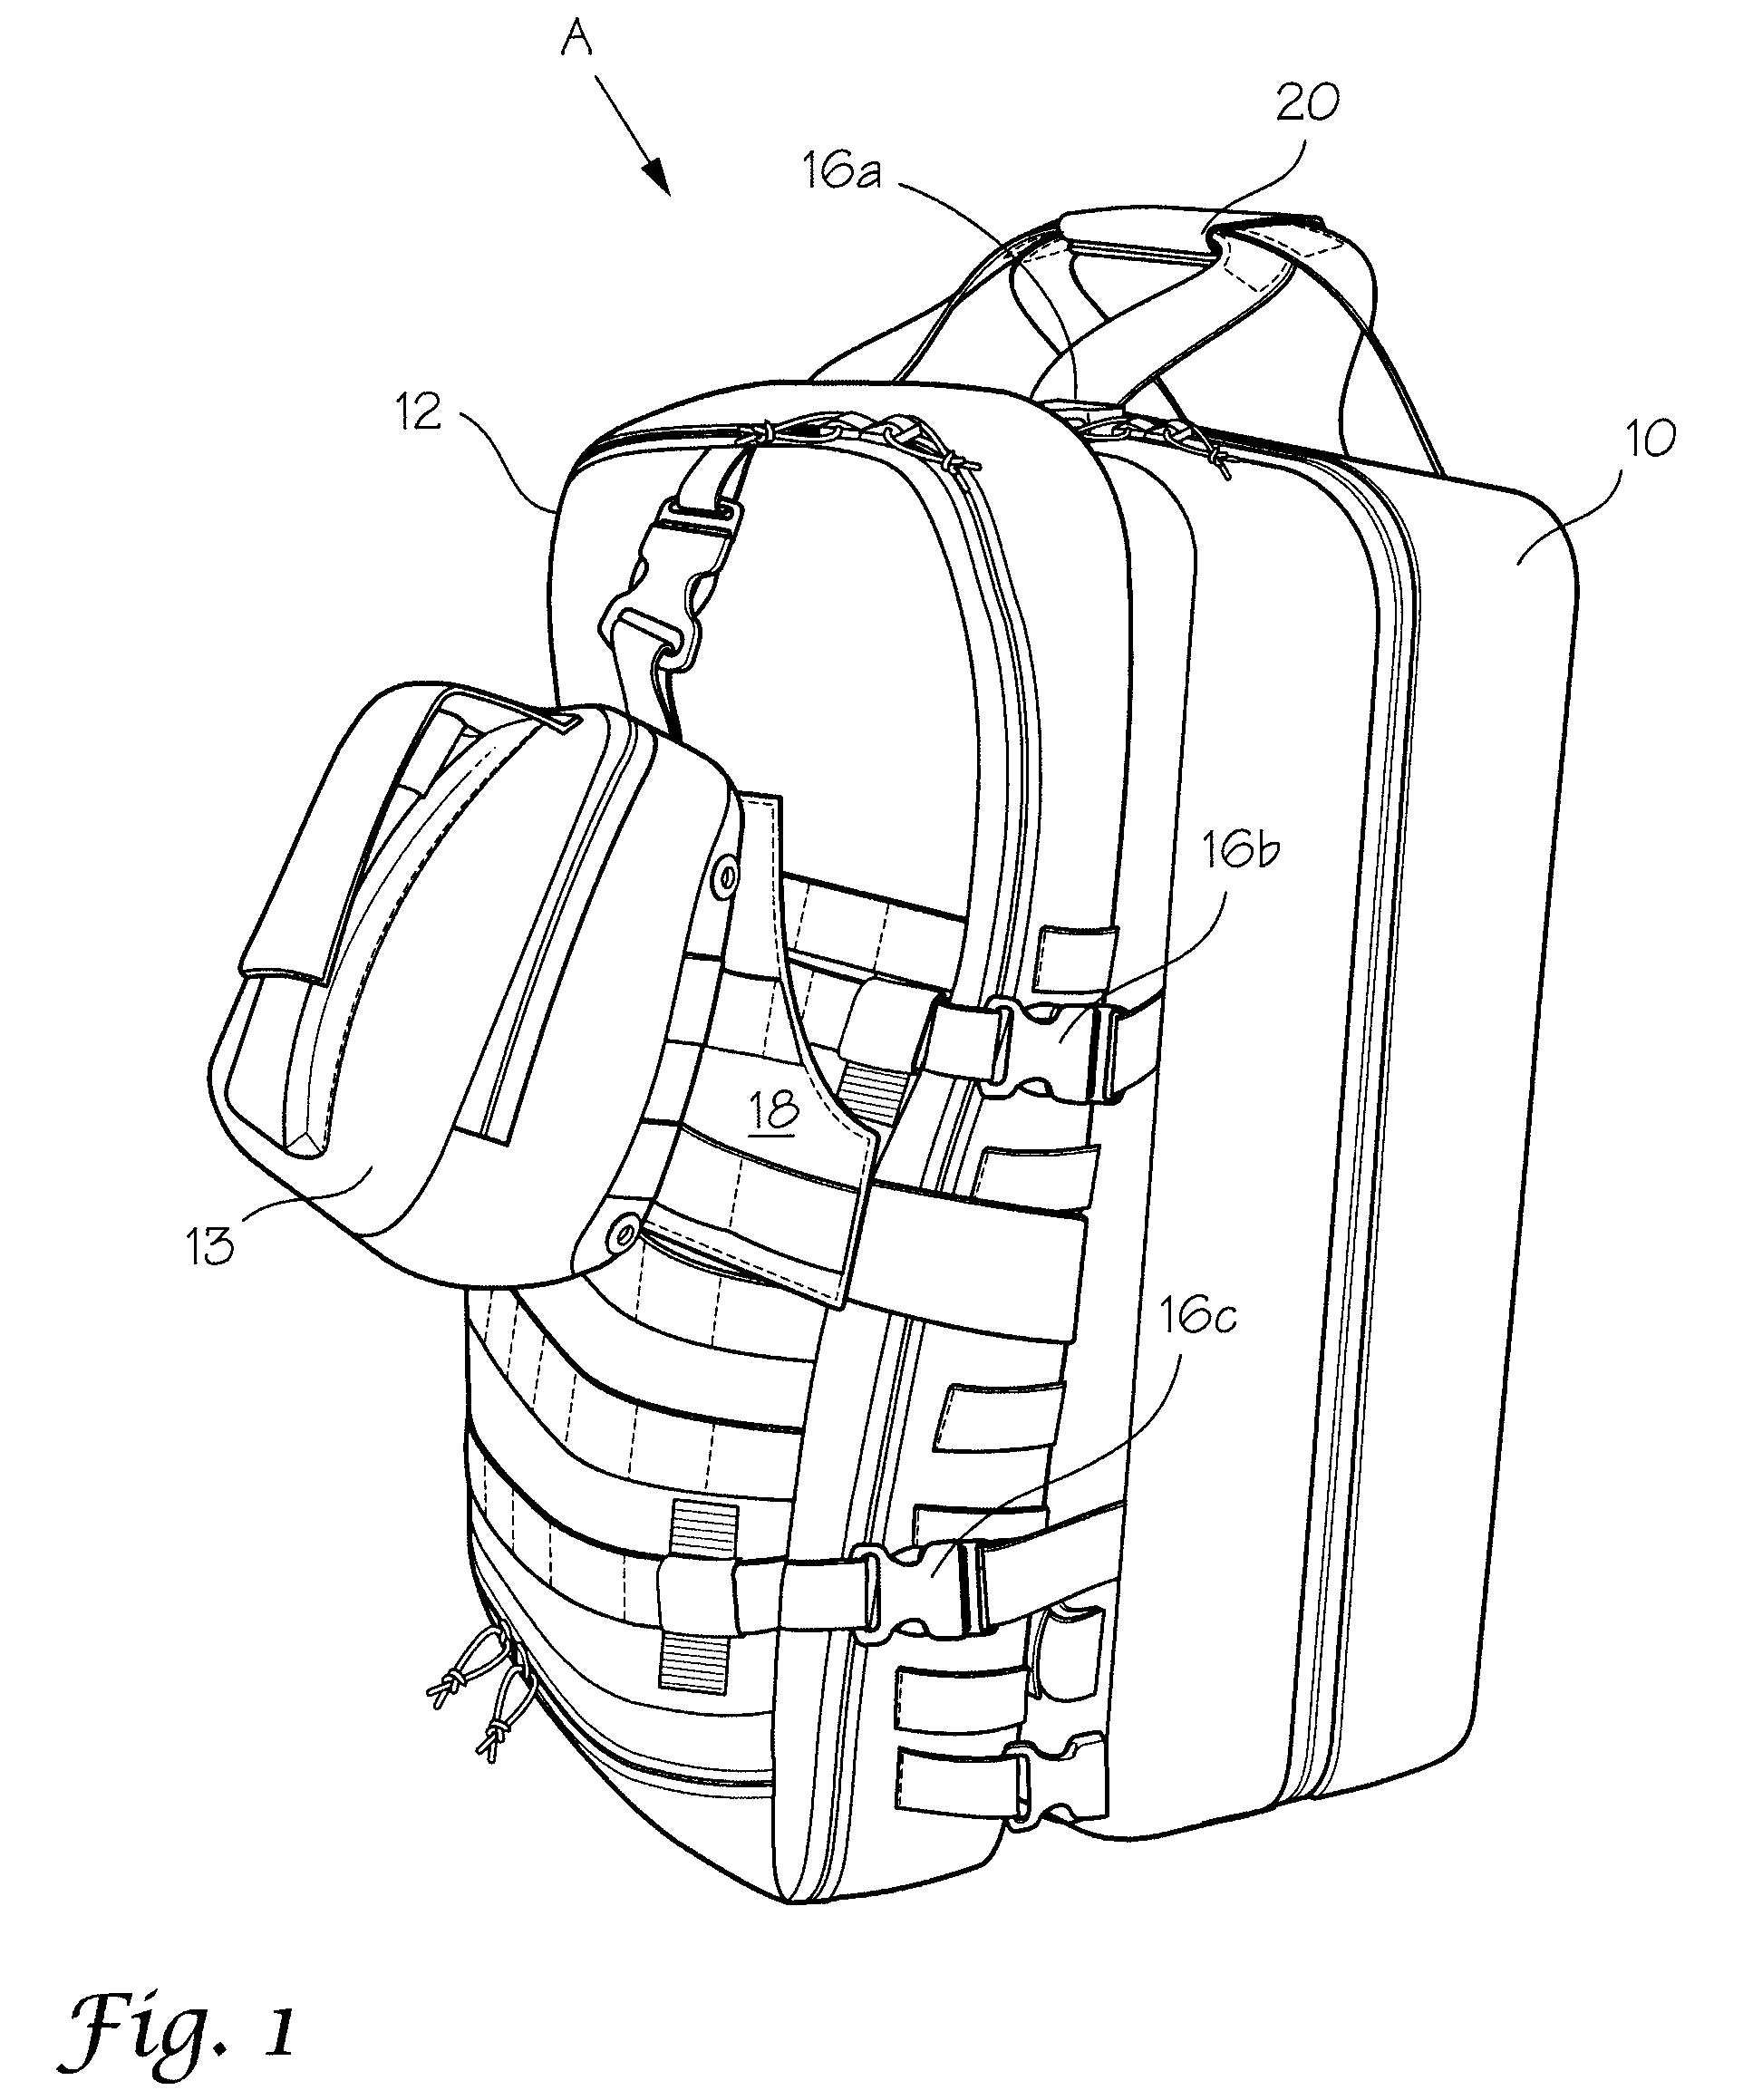 First-Aid Treatment Kit And Resupply System